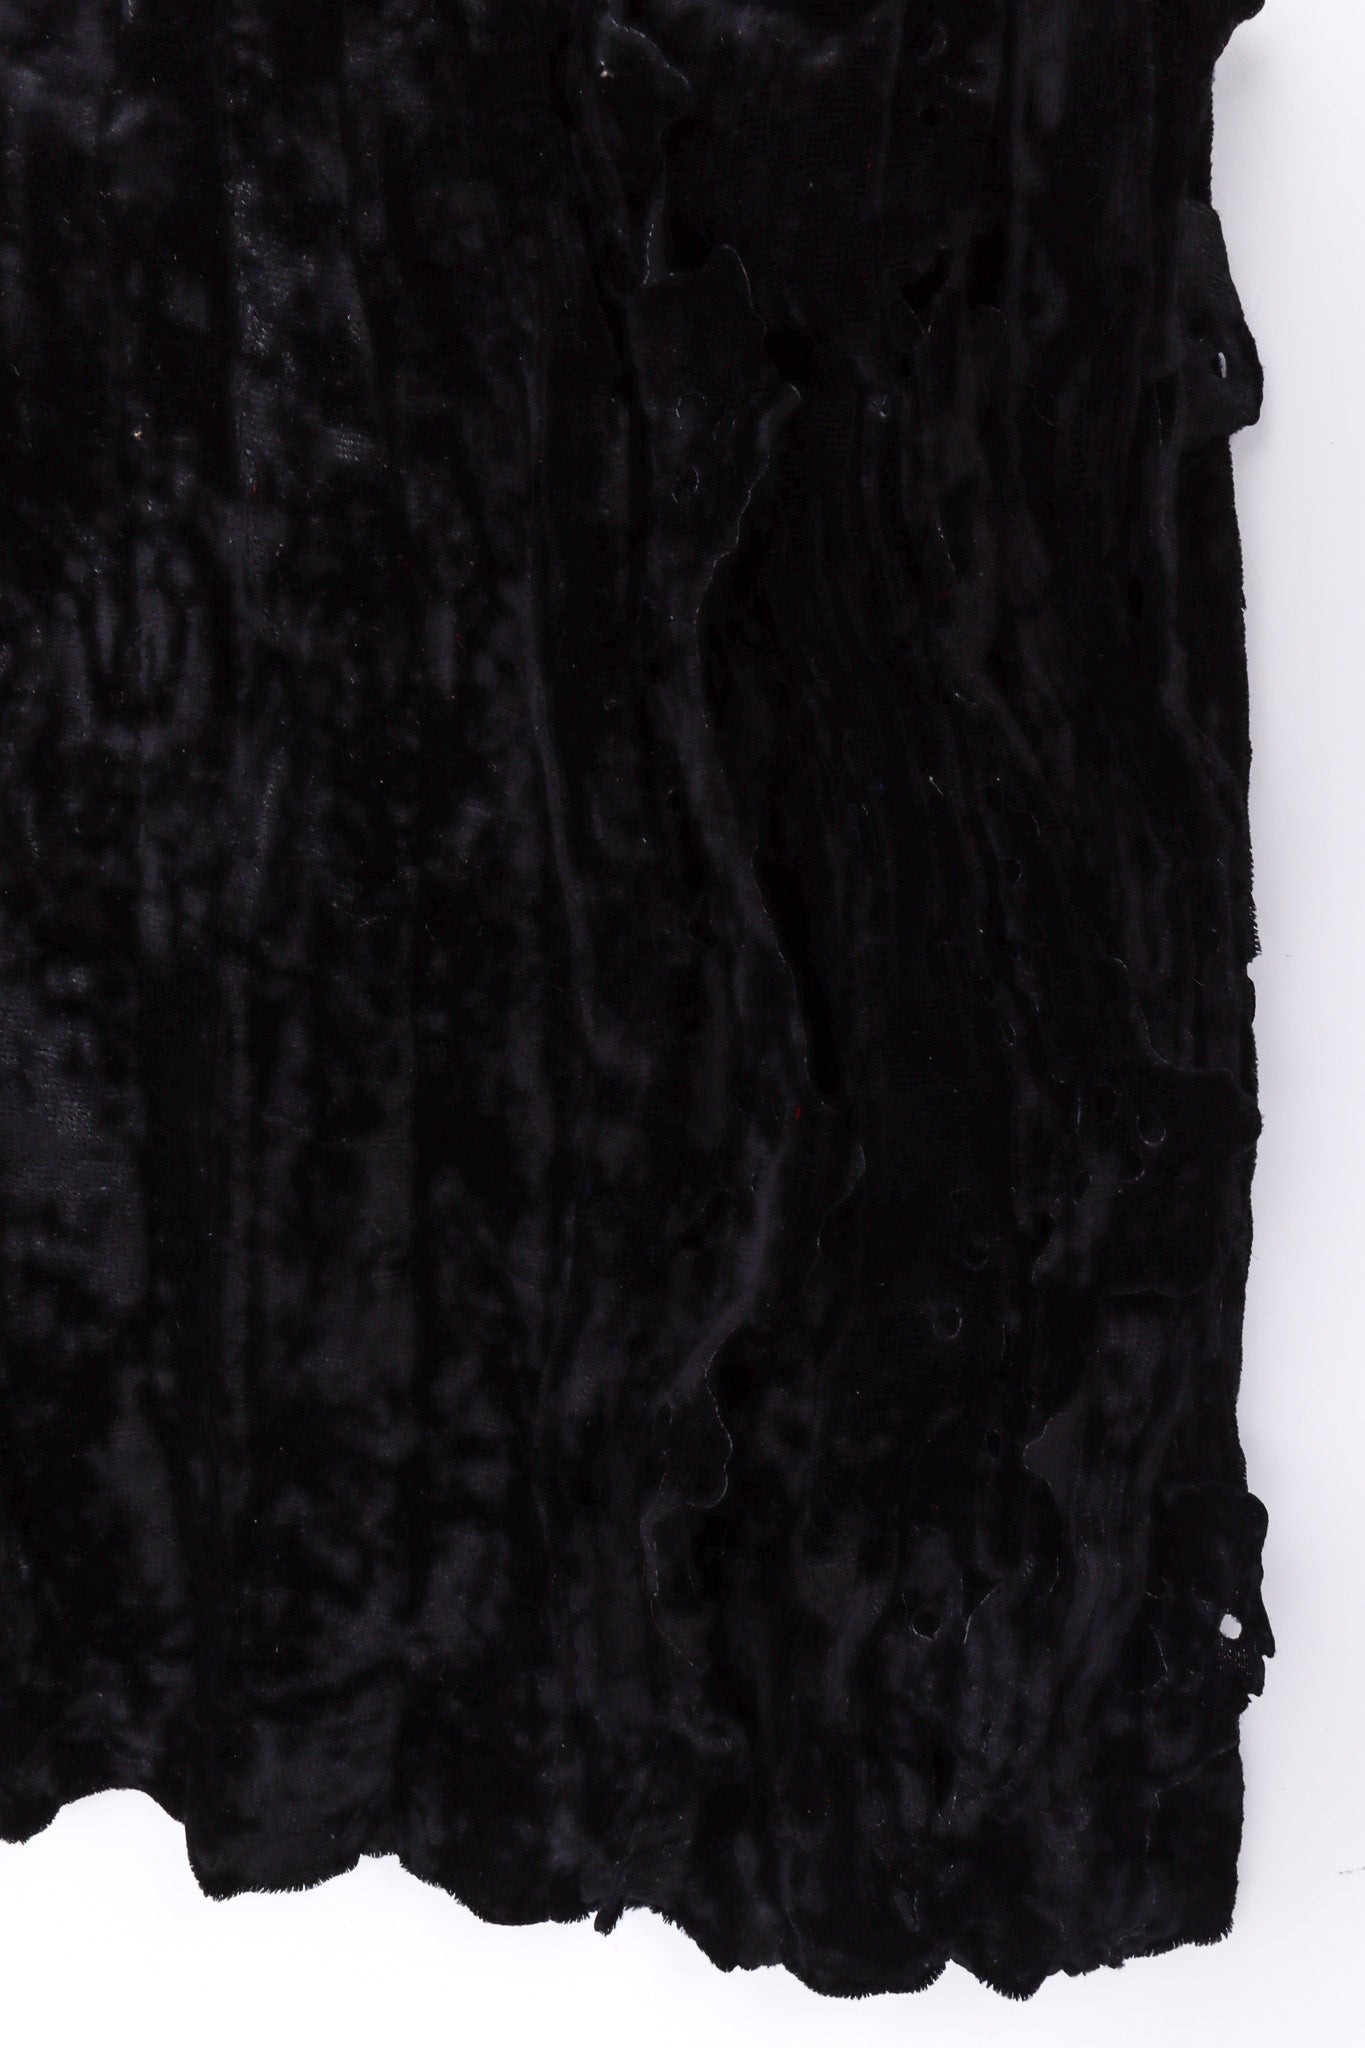 Crushed velvet midi skirt with eyelet lace by Issey Miyake Féte lace and hem close up @recessla